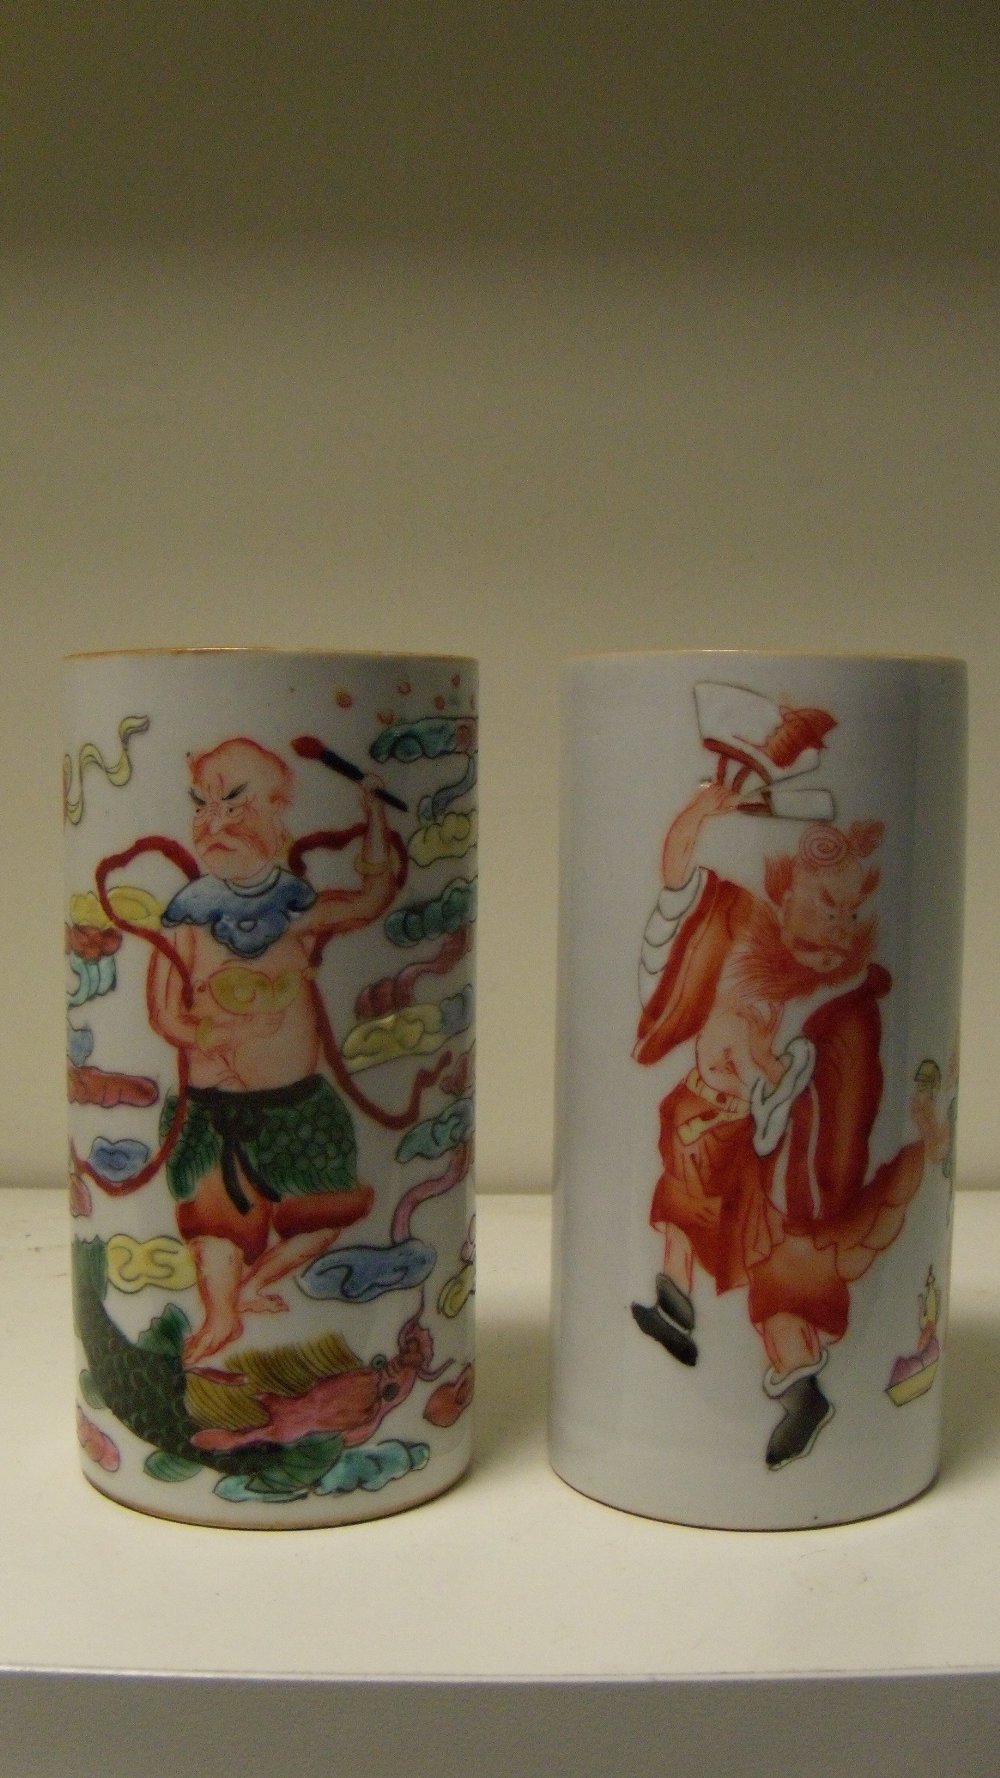 Two late 19th century brush pots, one of the cylindrical sides painted in iron red with Zhong Kui